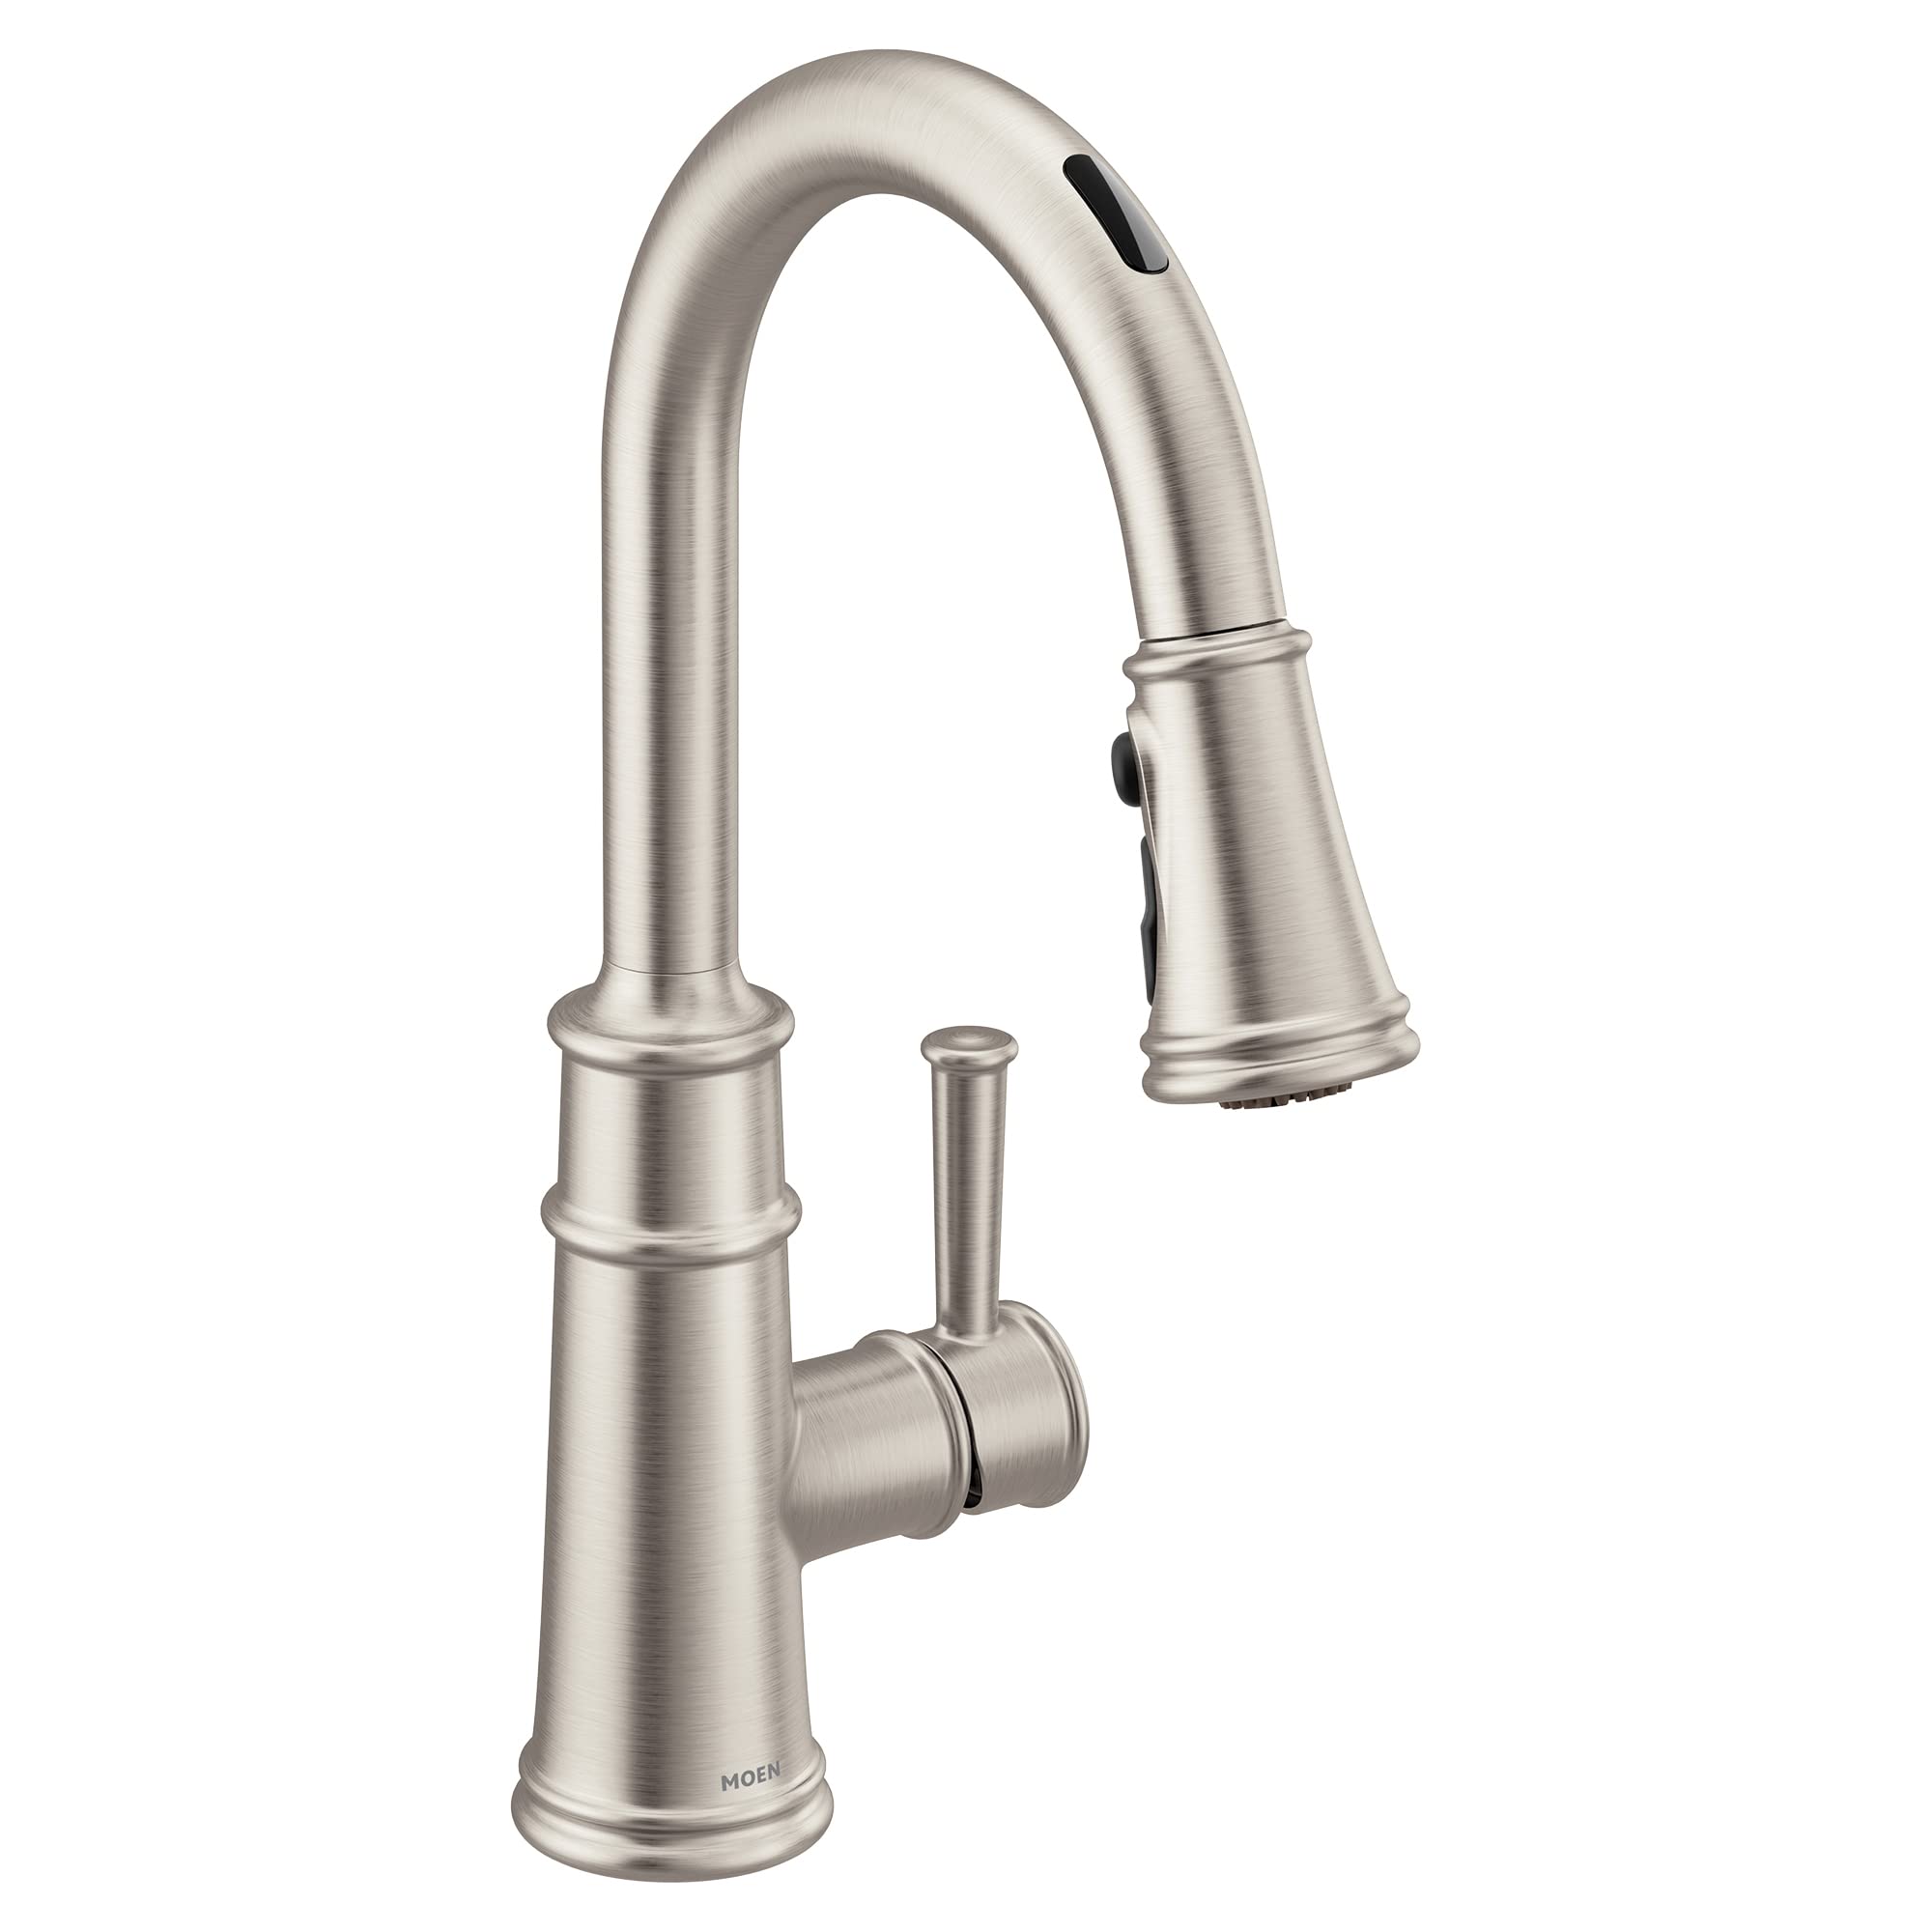 Moen 7260EVSRS Belfield Smart Touchless Pull Down Sprayer Kitchen Faucet with Voice Control and Power Boost, Spot Resist Stainless